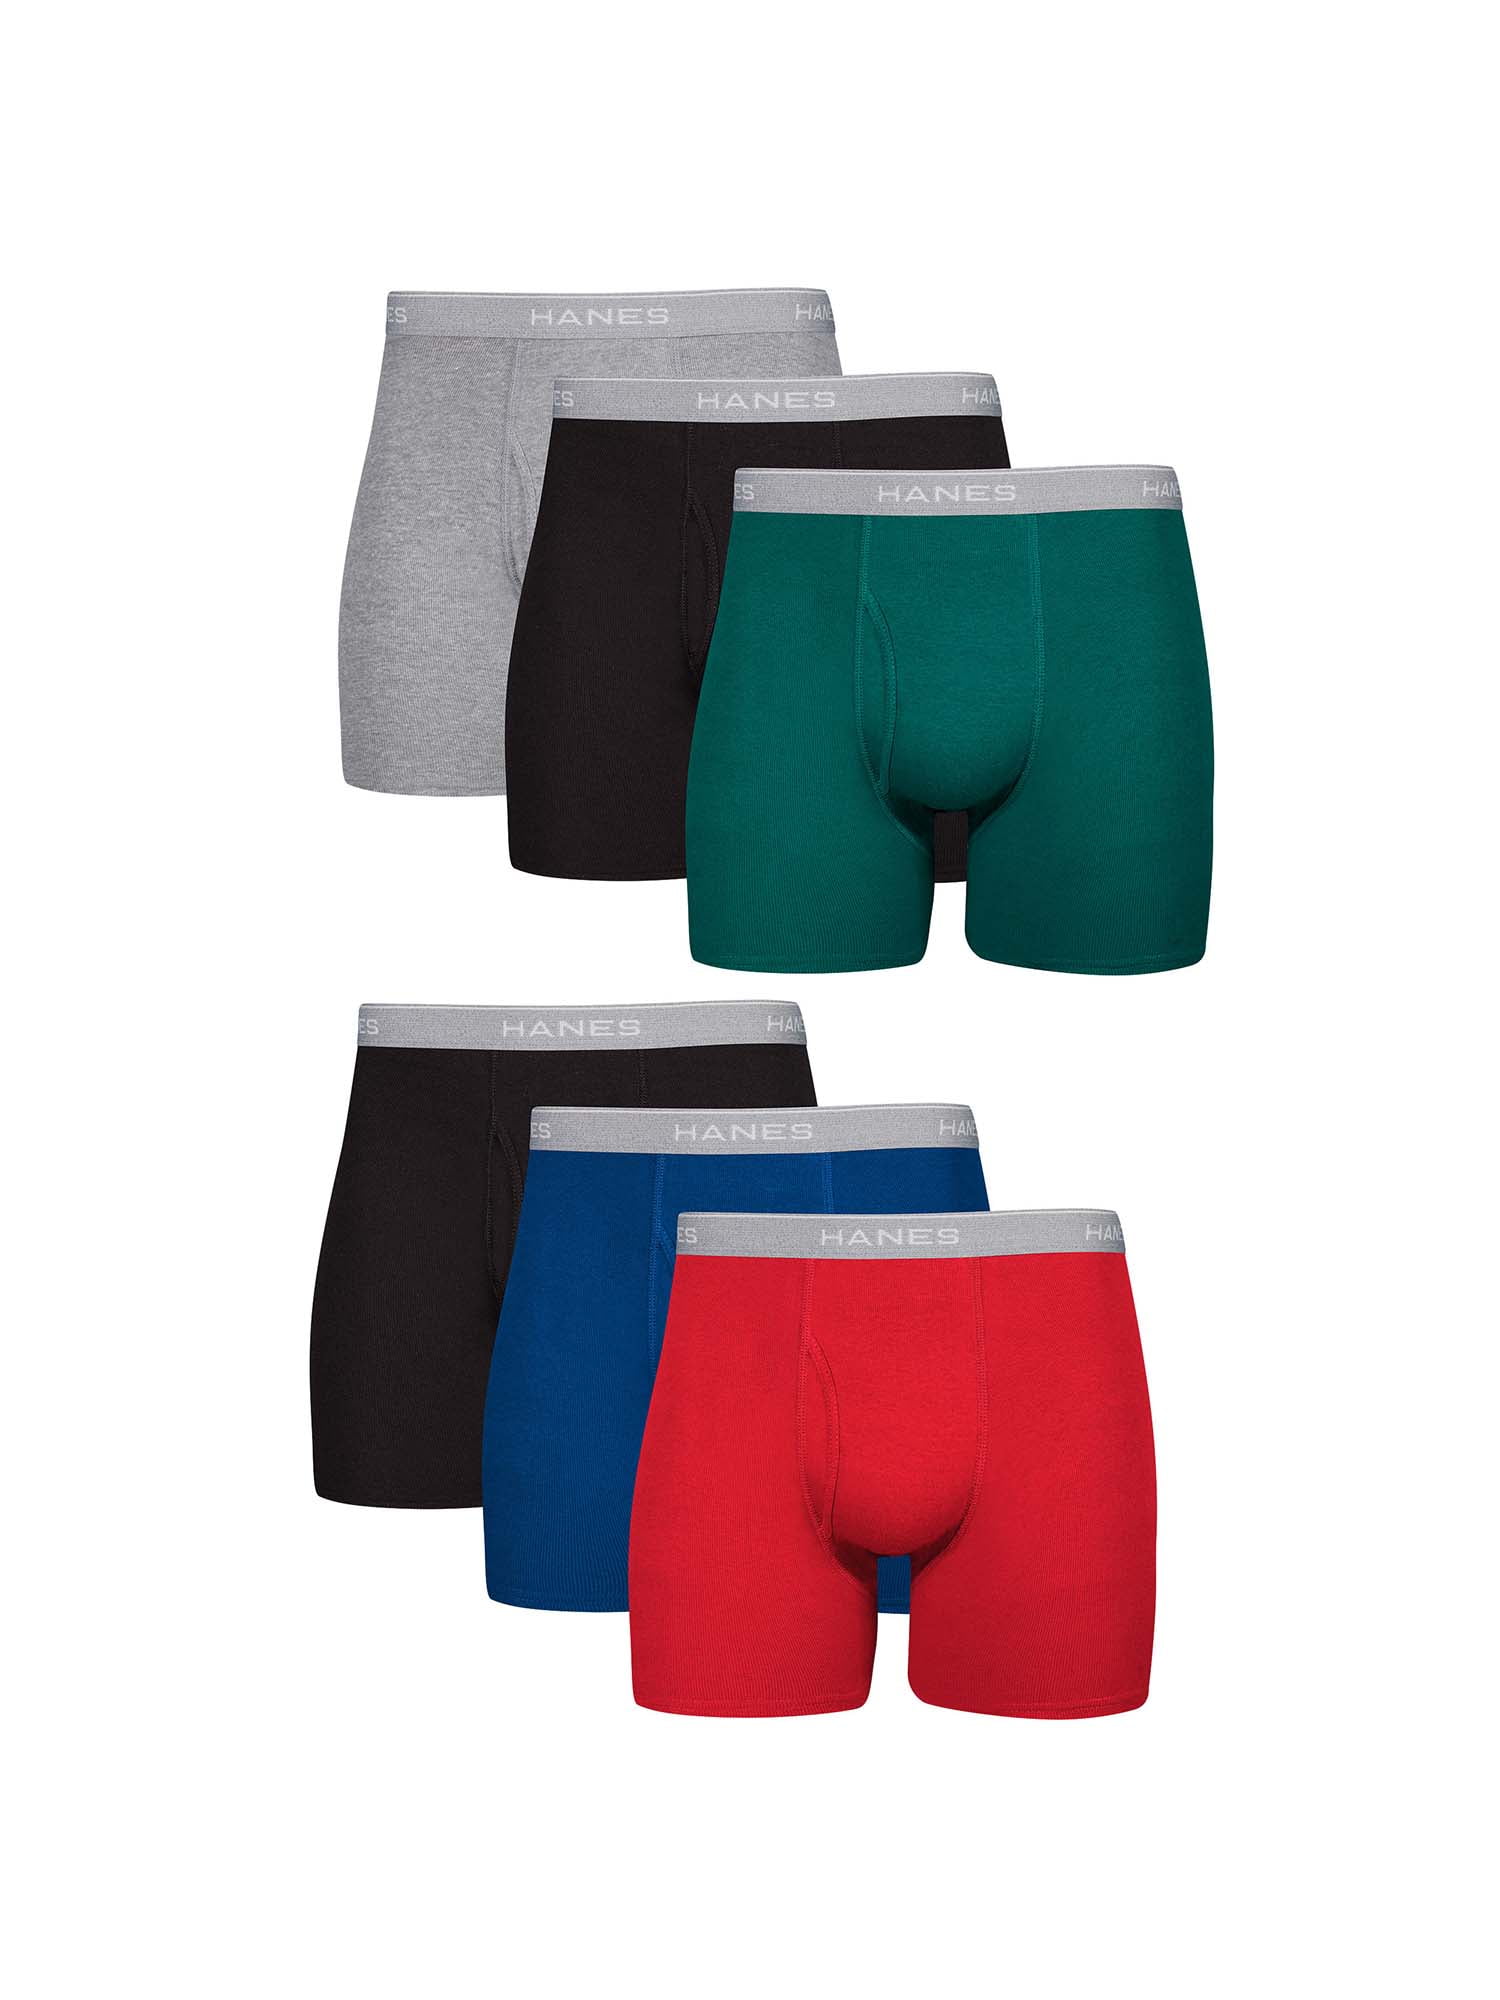 Tenn Ladies Deluxe Padded Cycling/Equestrian Undershorts Boxers